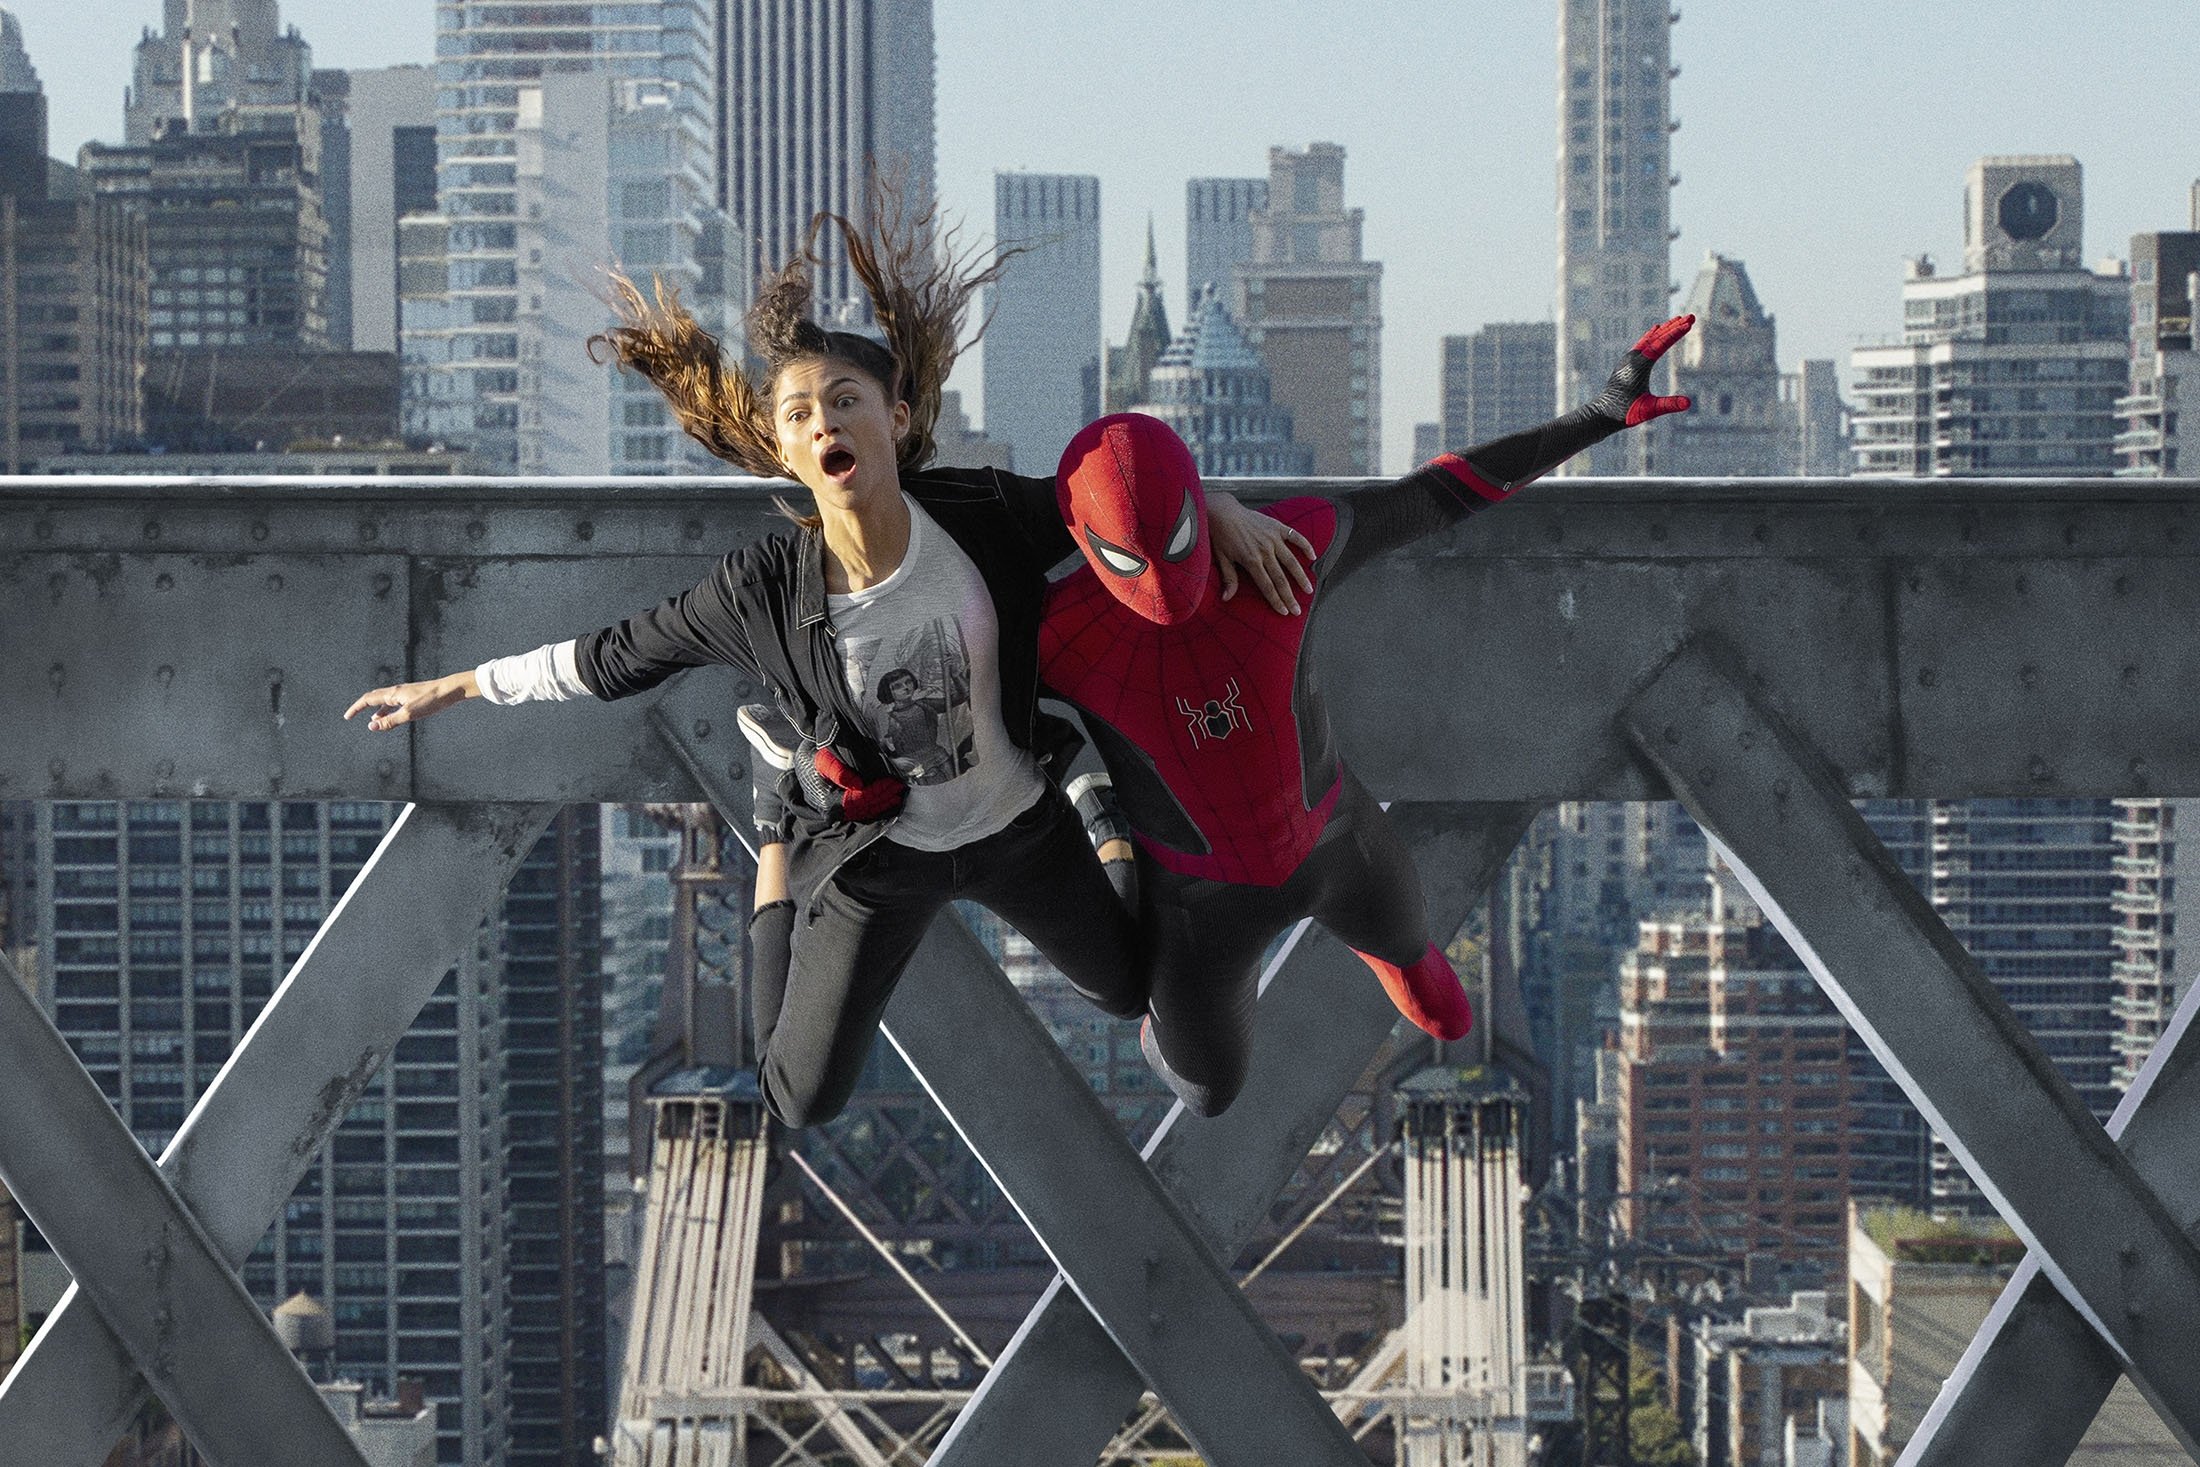 Zendaya (L) and Tom Holland in a scene from the film “Spider-Man: No Way Home.” (Sony Pictures via AP)